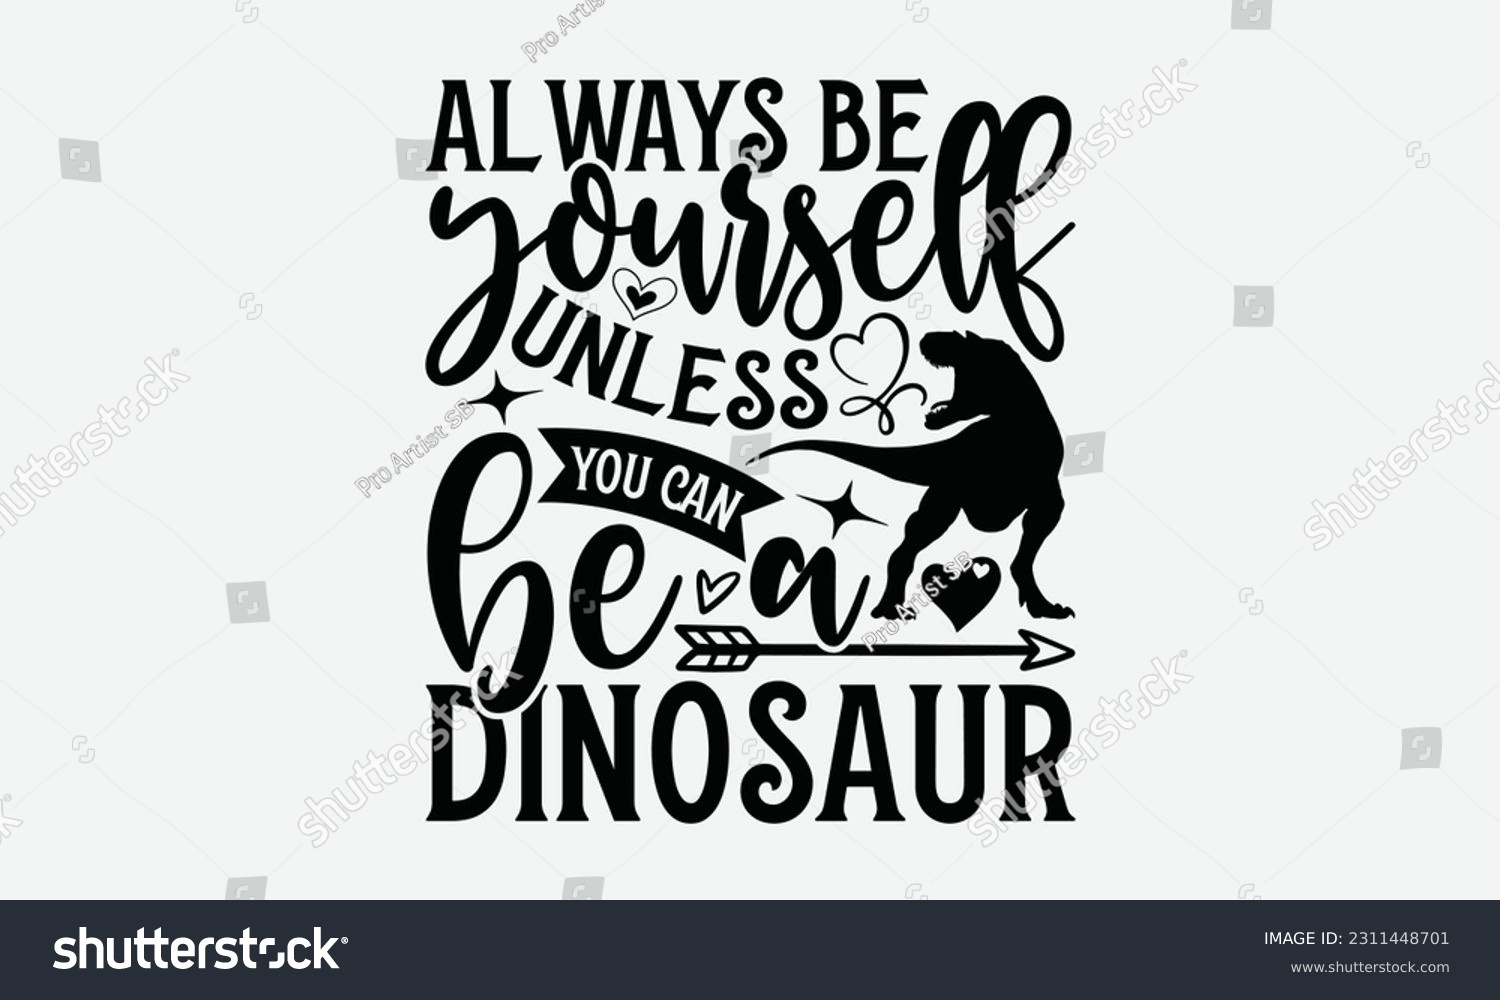 SVG of Always Be Yourself Unless You Can Be A Dinosaur - Dinosaur SVG Design, Motivational Inspirational T-shirt Quotes, Hand Drawn Vintage Illustration With Hand-Lettering And Decoration Elements. svg